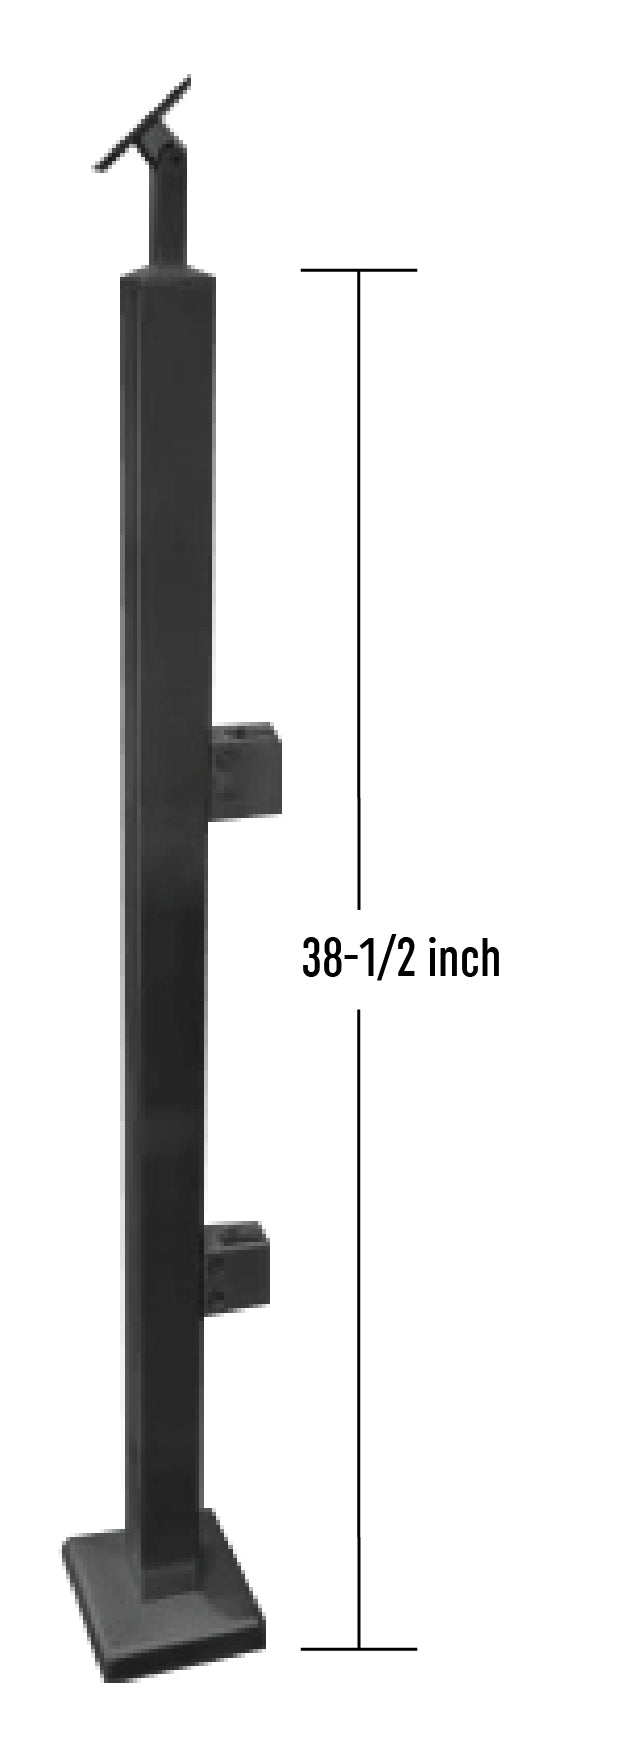 IPSQ40S42E316BL Black Square Stainless Steel Post End Height- 42" SS316